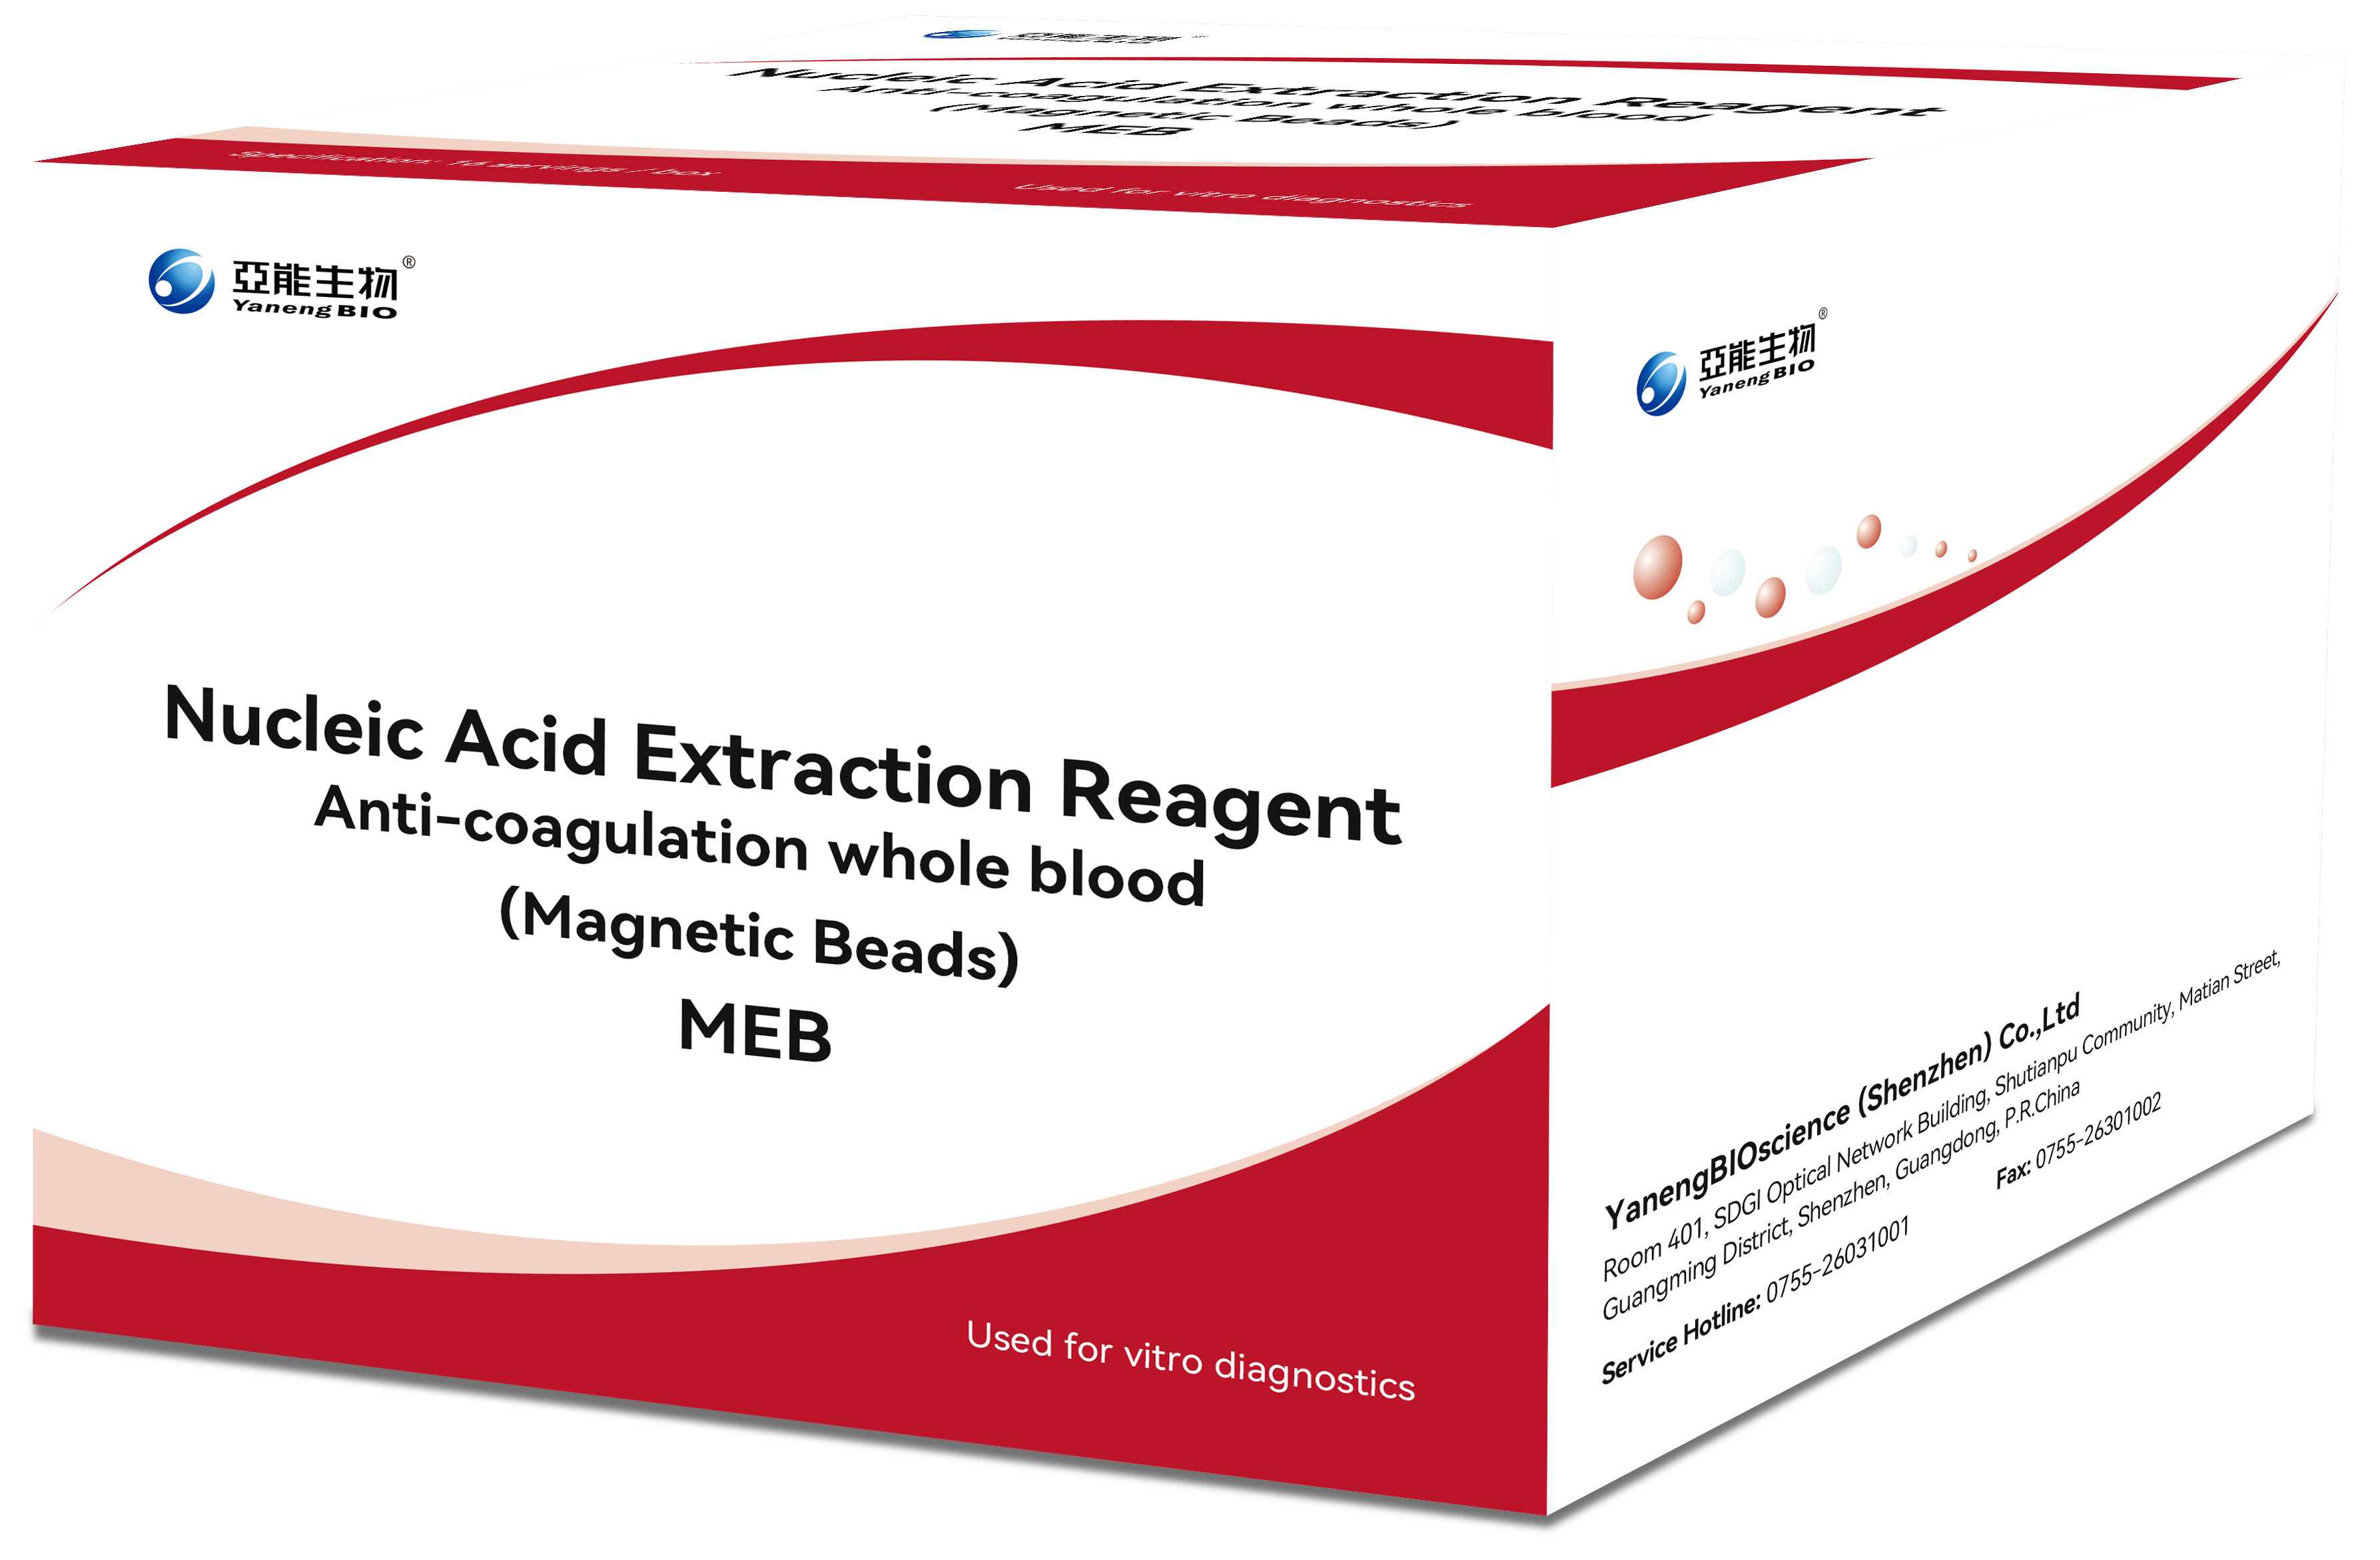 Nucleic Acid Extraction Reagent -- MEB